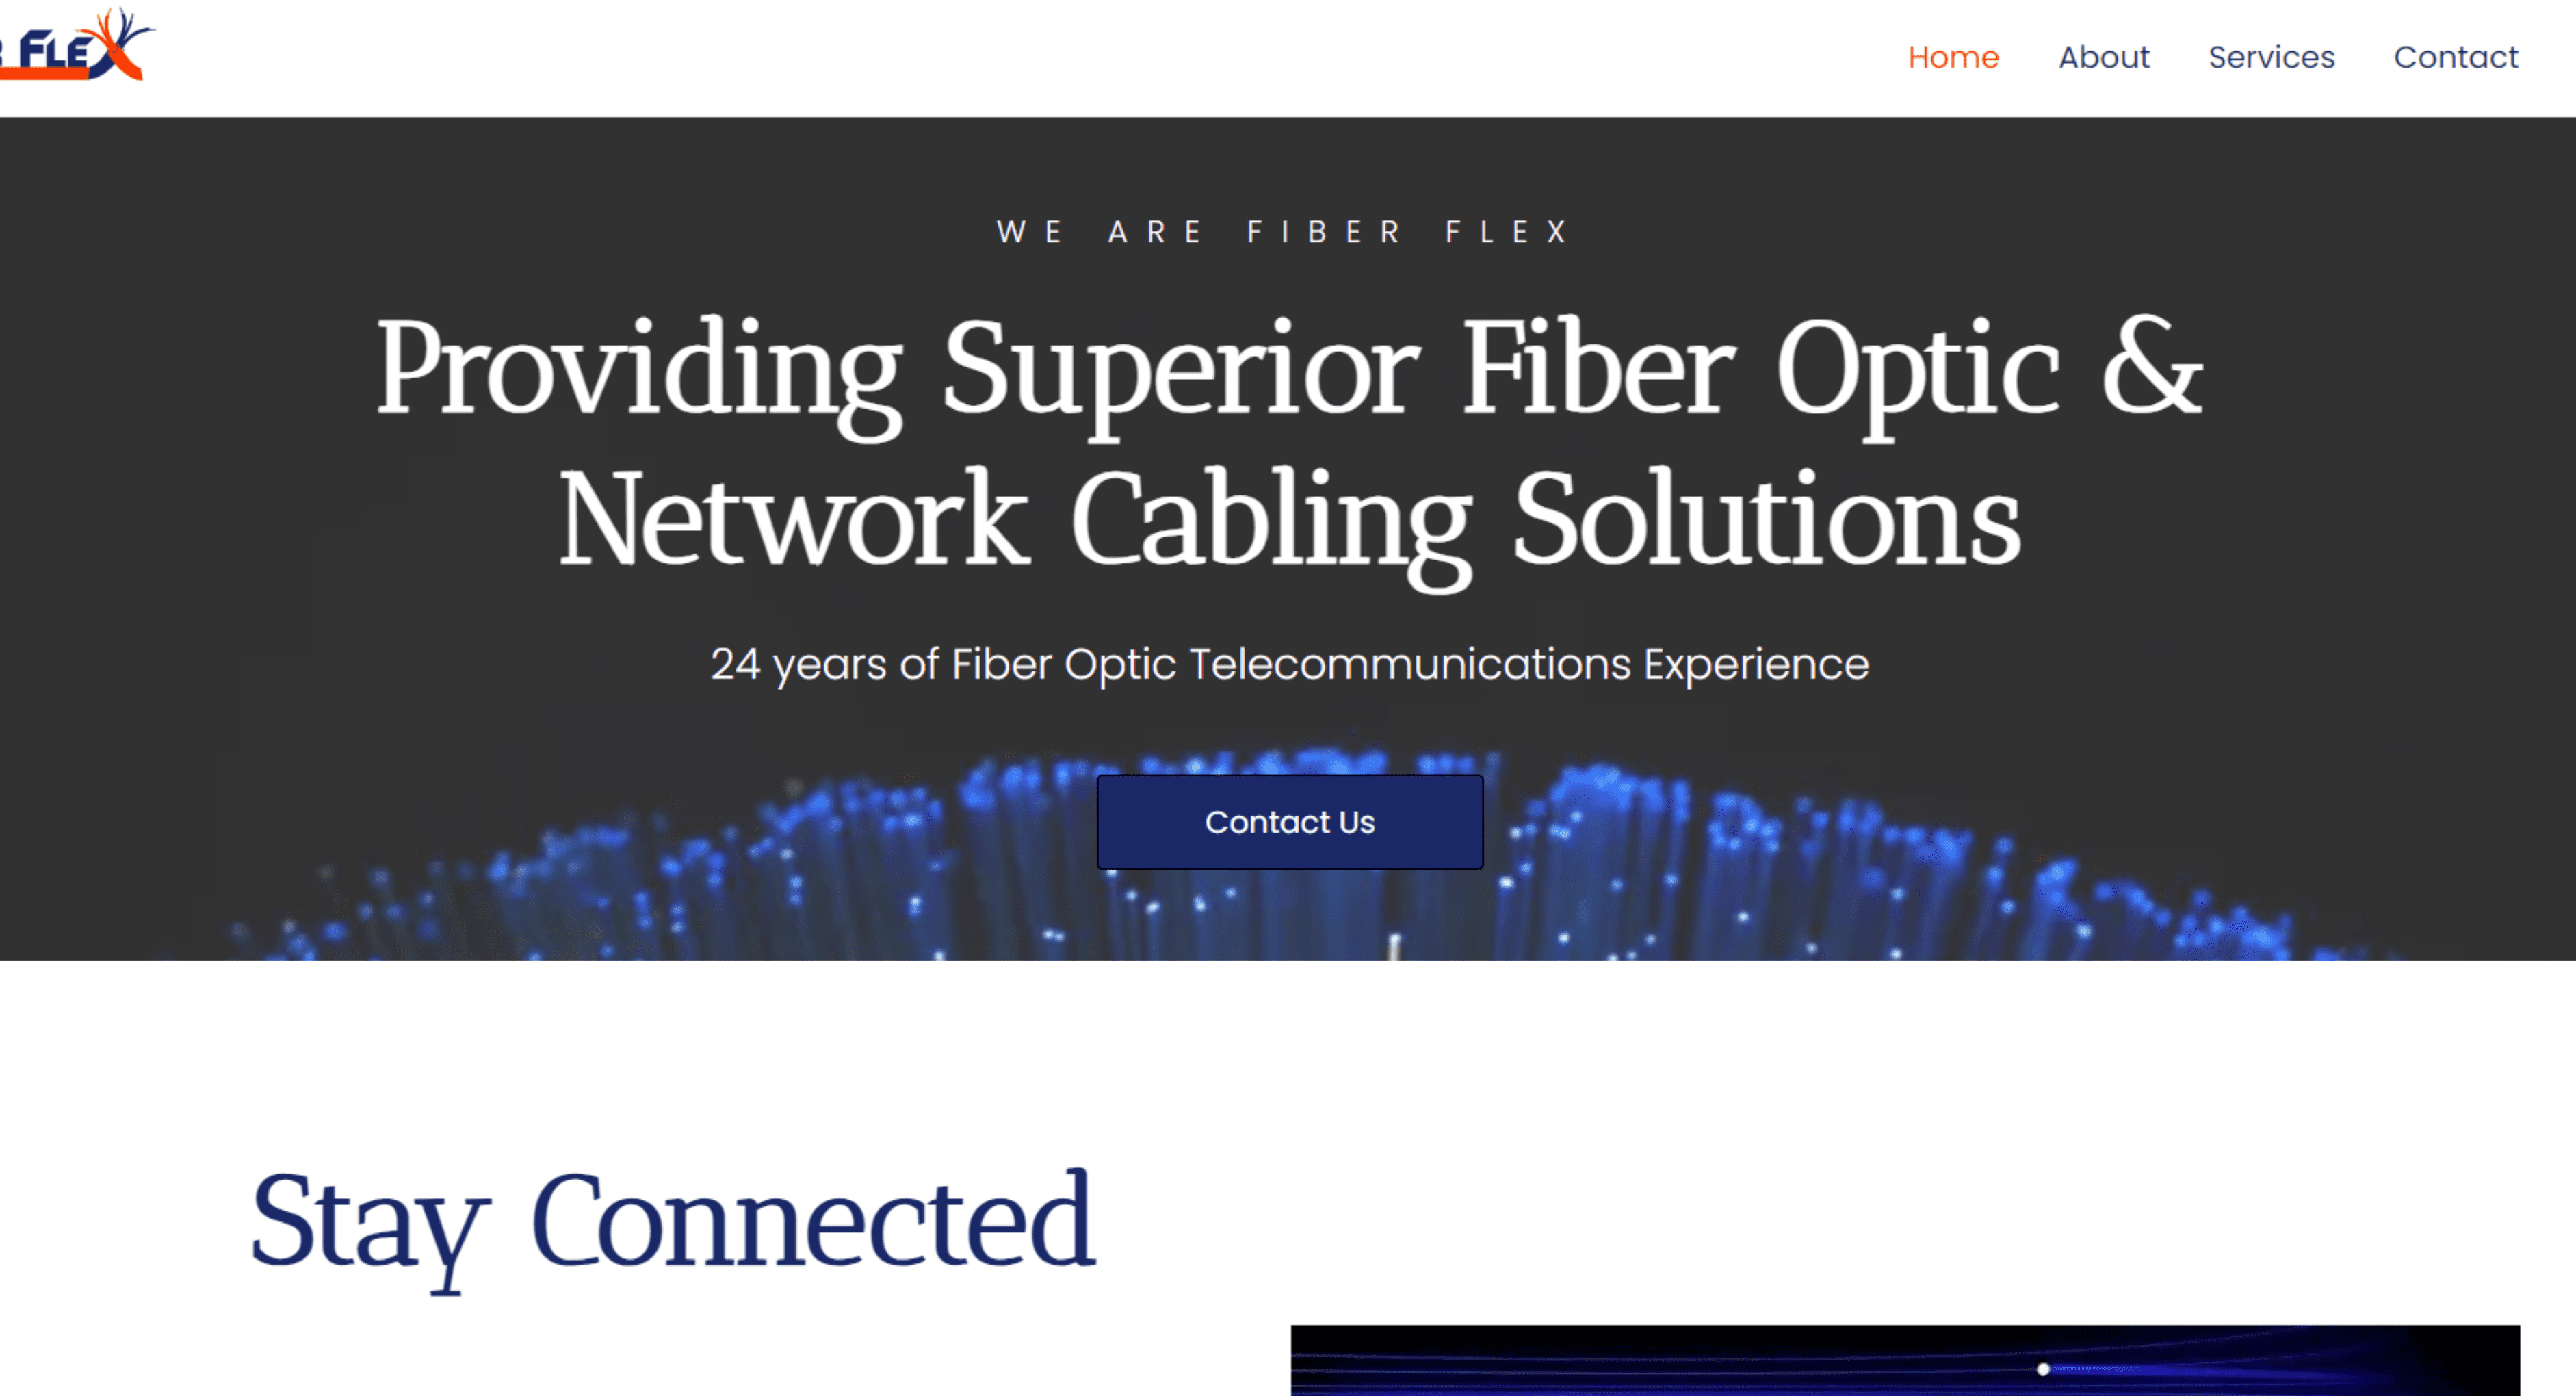 Fiber Flex was created simple and clean website. And the domain was also set up by Biz Ops Rwanda.